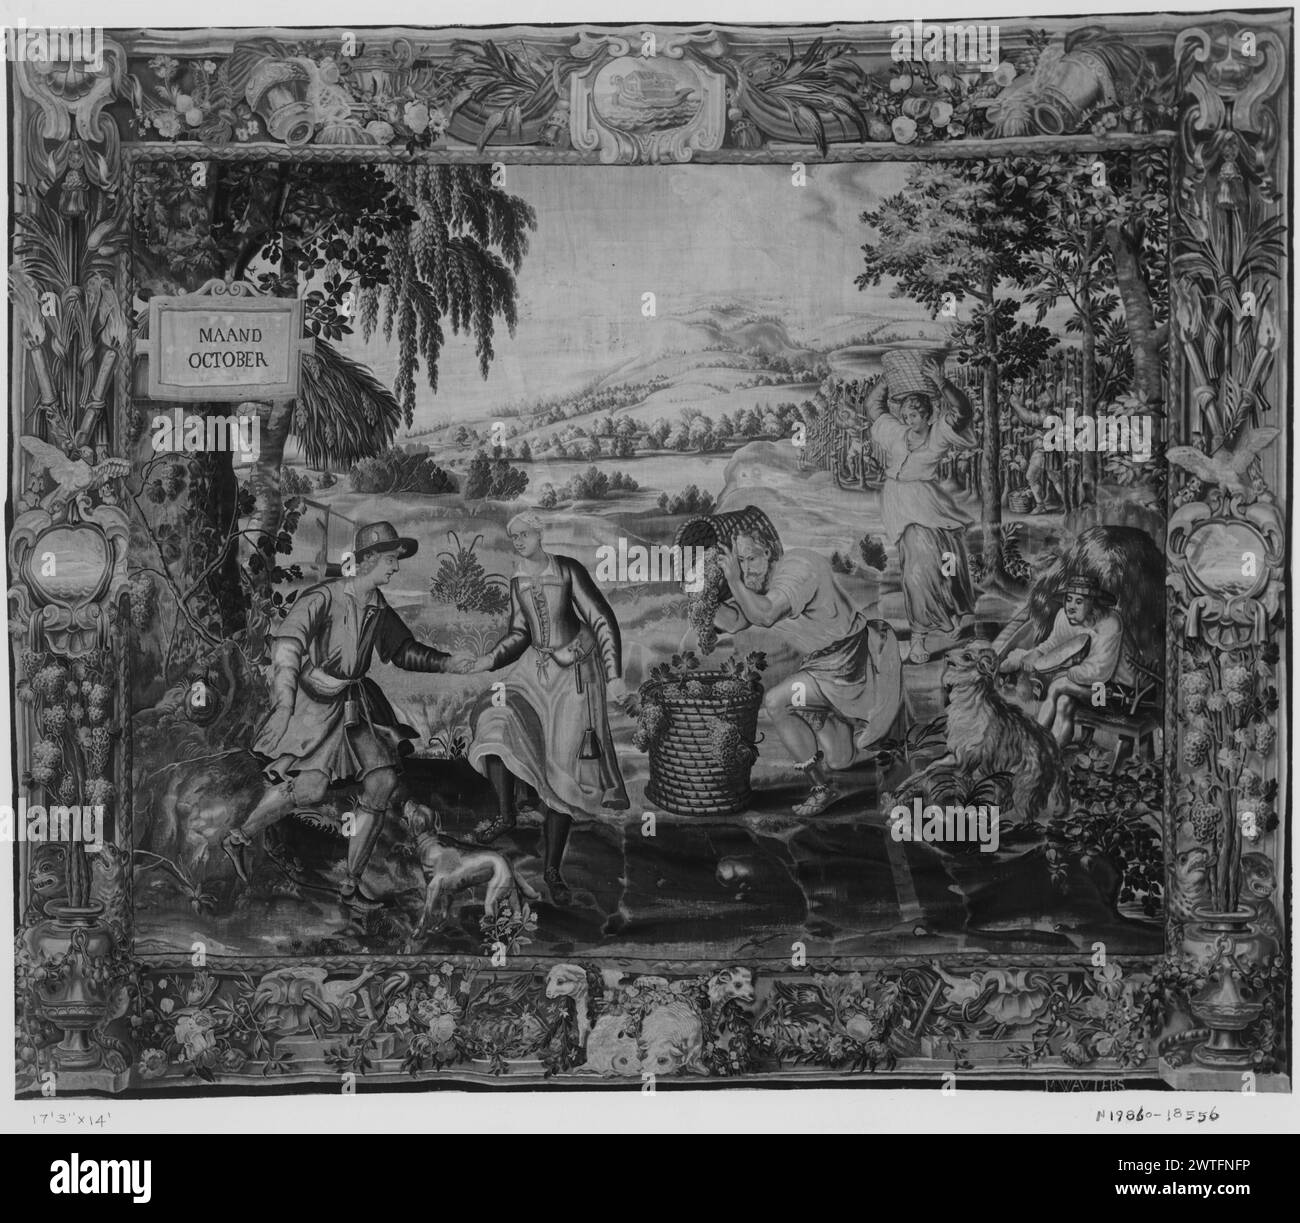 October. Wauters, Michel (Netherlandish (after 1600), act. b.1651-d.1679) (workshop) [weaver] c. 1650-1675 Tapestry Dimensions: H 14' x W 17'3' Tapestry Materials/Techniques: unknown Culture: Flemish Weaving Center: Antwerp Ownership History: Sold at American Art Association, New York, 2/13/1926, lot 17 (Emile Jellinek Mercedes coll.). French & Co. purchased from G.S. Jacobson 2/11/1936. Inscriptions: Woven signature in right guard, bottom: M.WAVTERS Inscriptions: Inscription in central field on panel attached to tree: MAAND OCTOBER In vineyard, peasant loading grapes into basket (center, fore Stock Photo